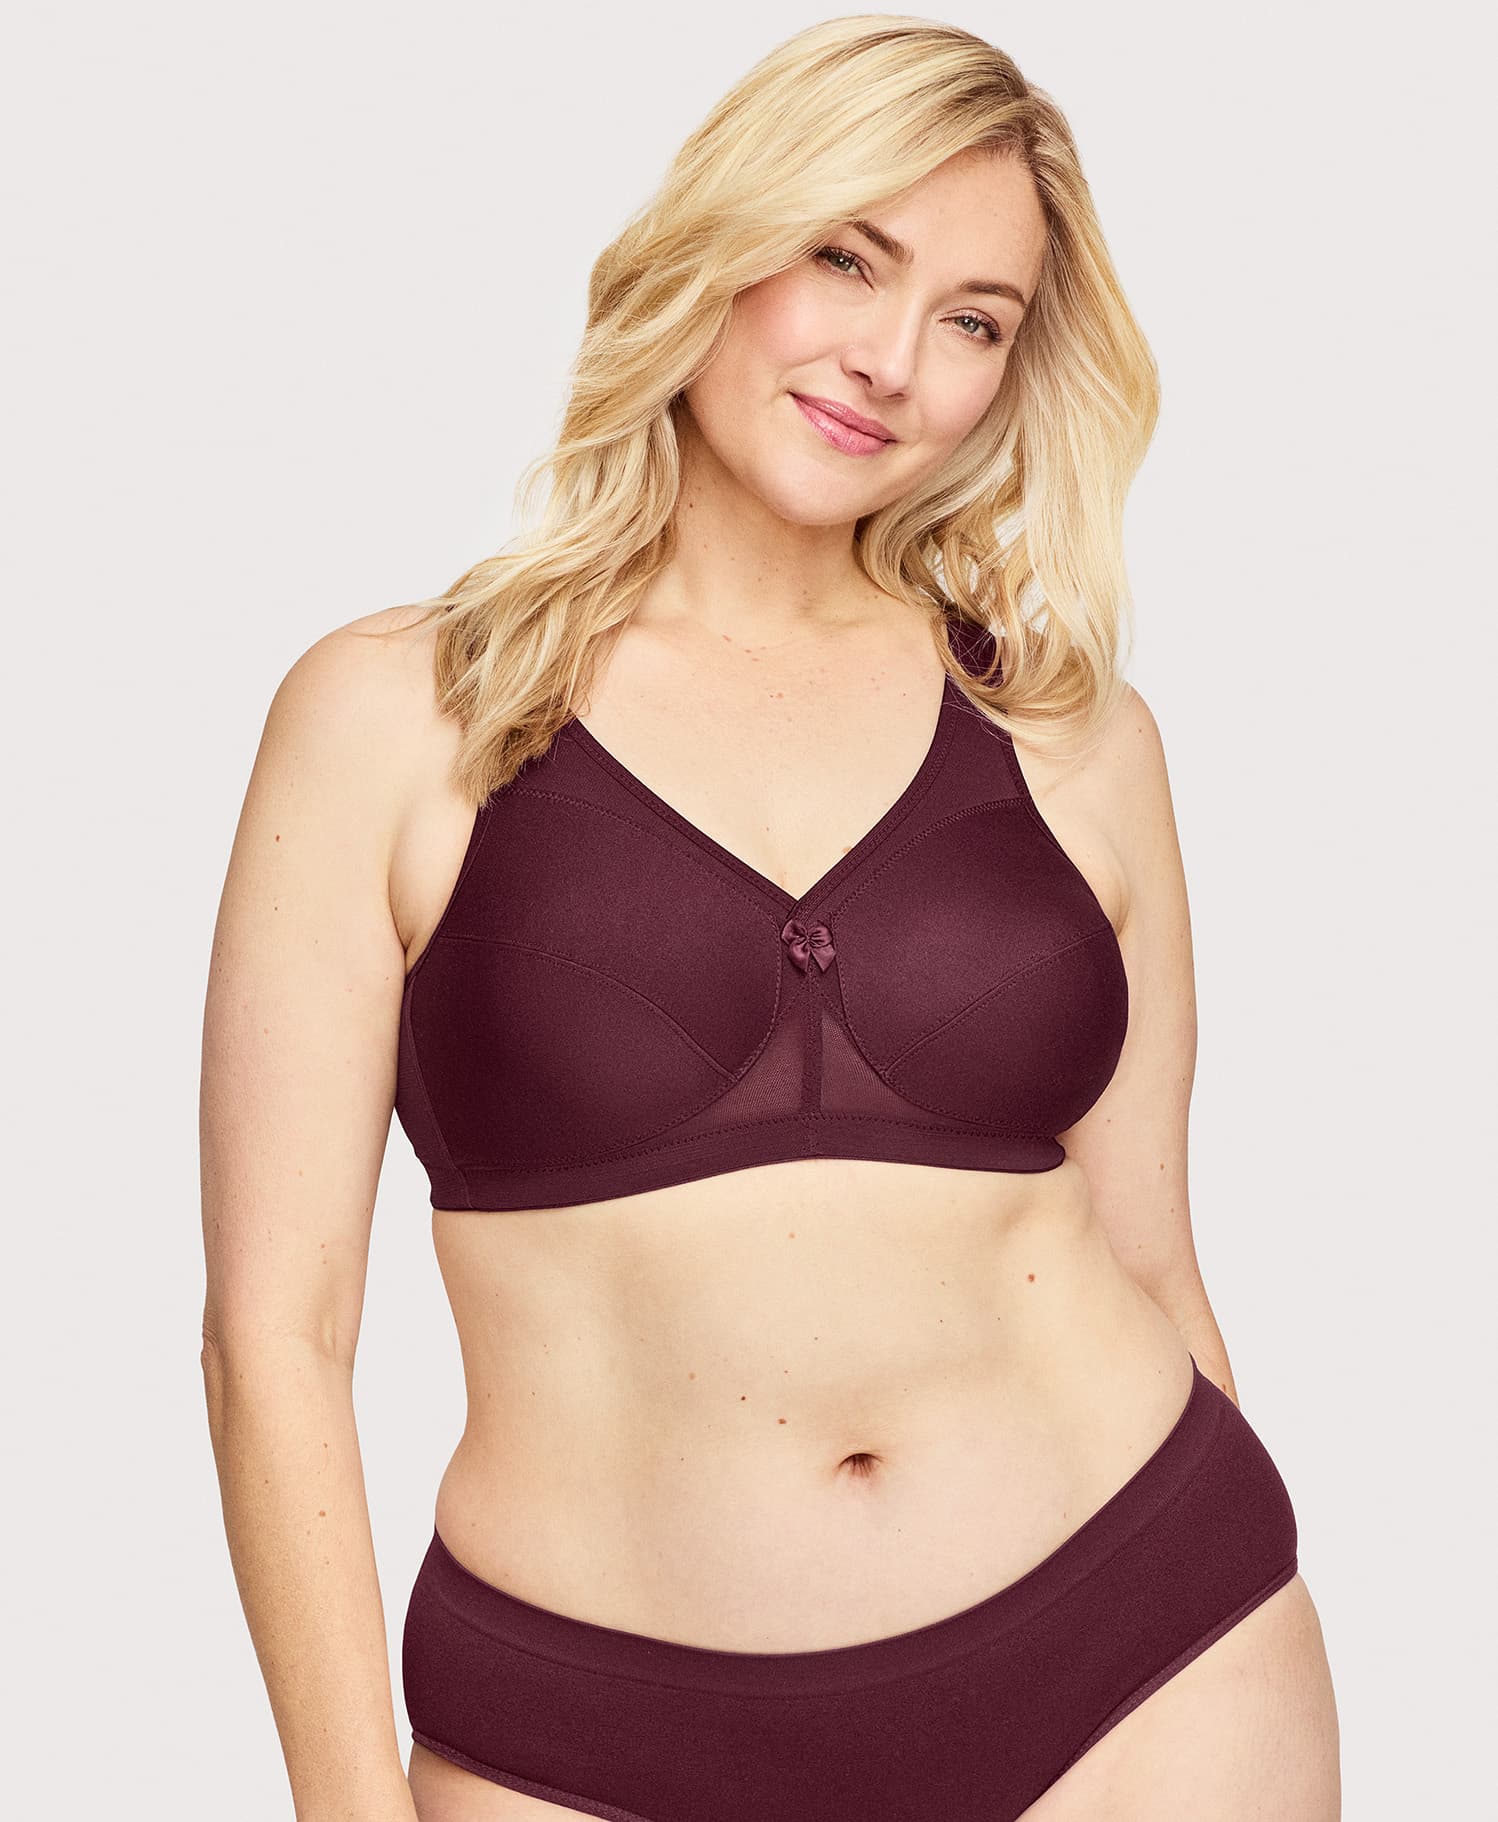 Women's Full Figure Plus Size Push Up MagicLift Original Wirefree Support  Bra, Wine Red 32DDD Cup